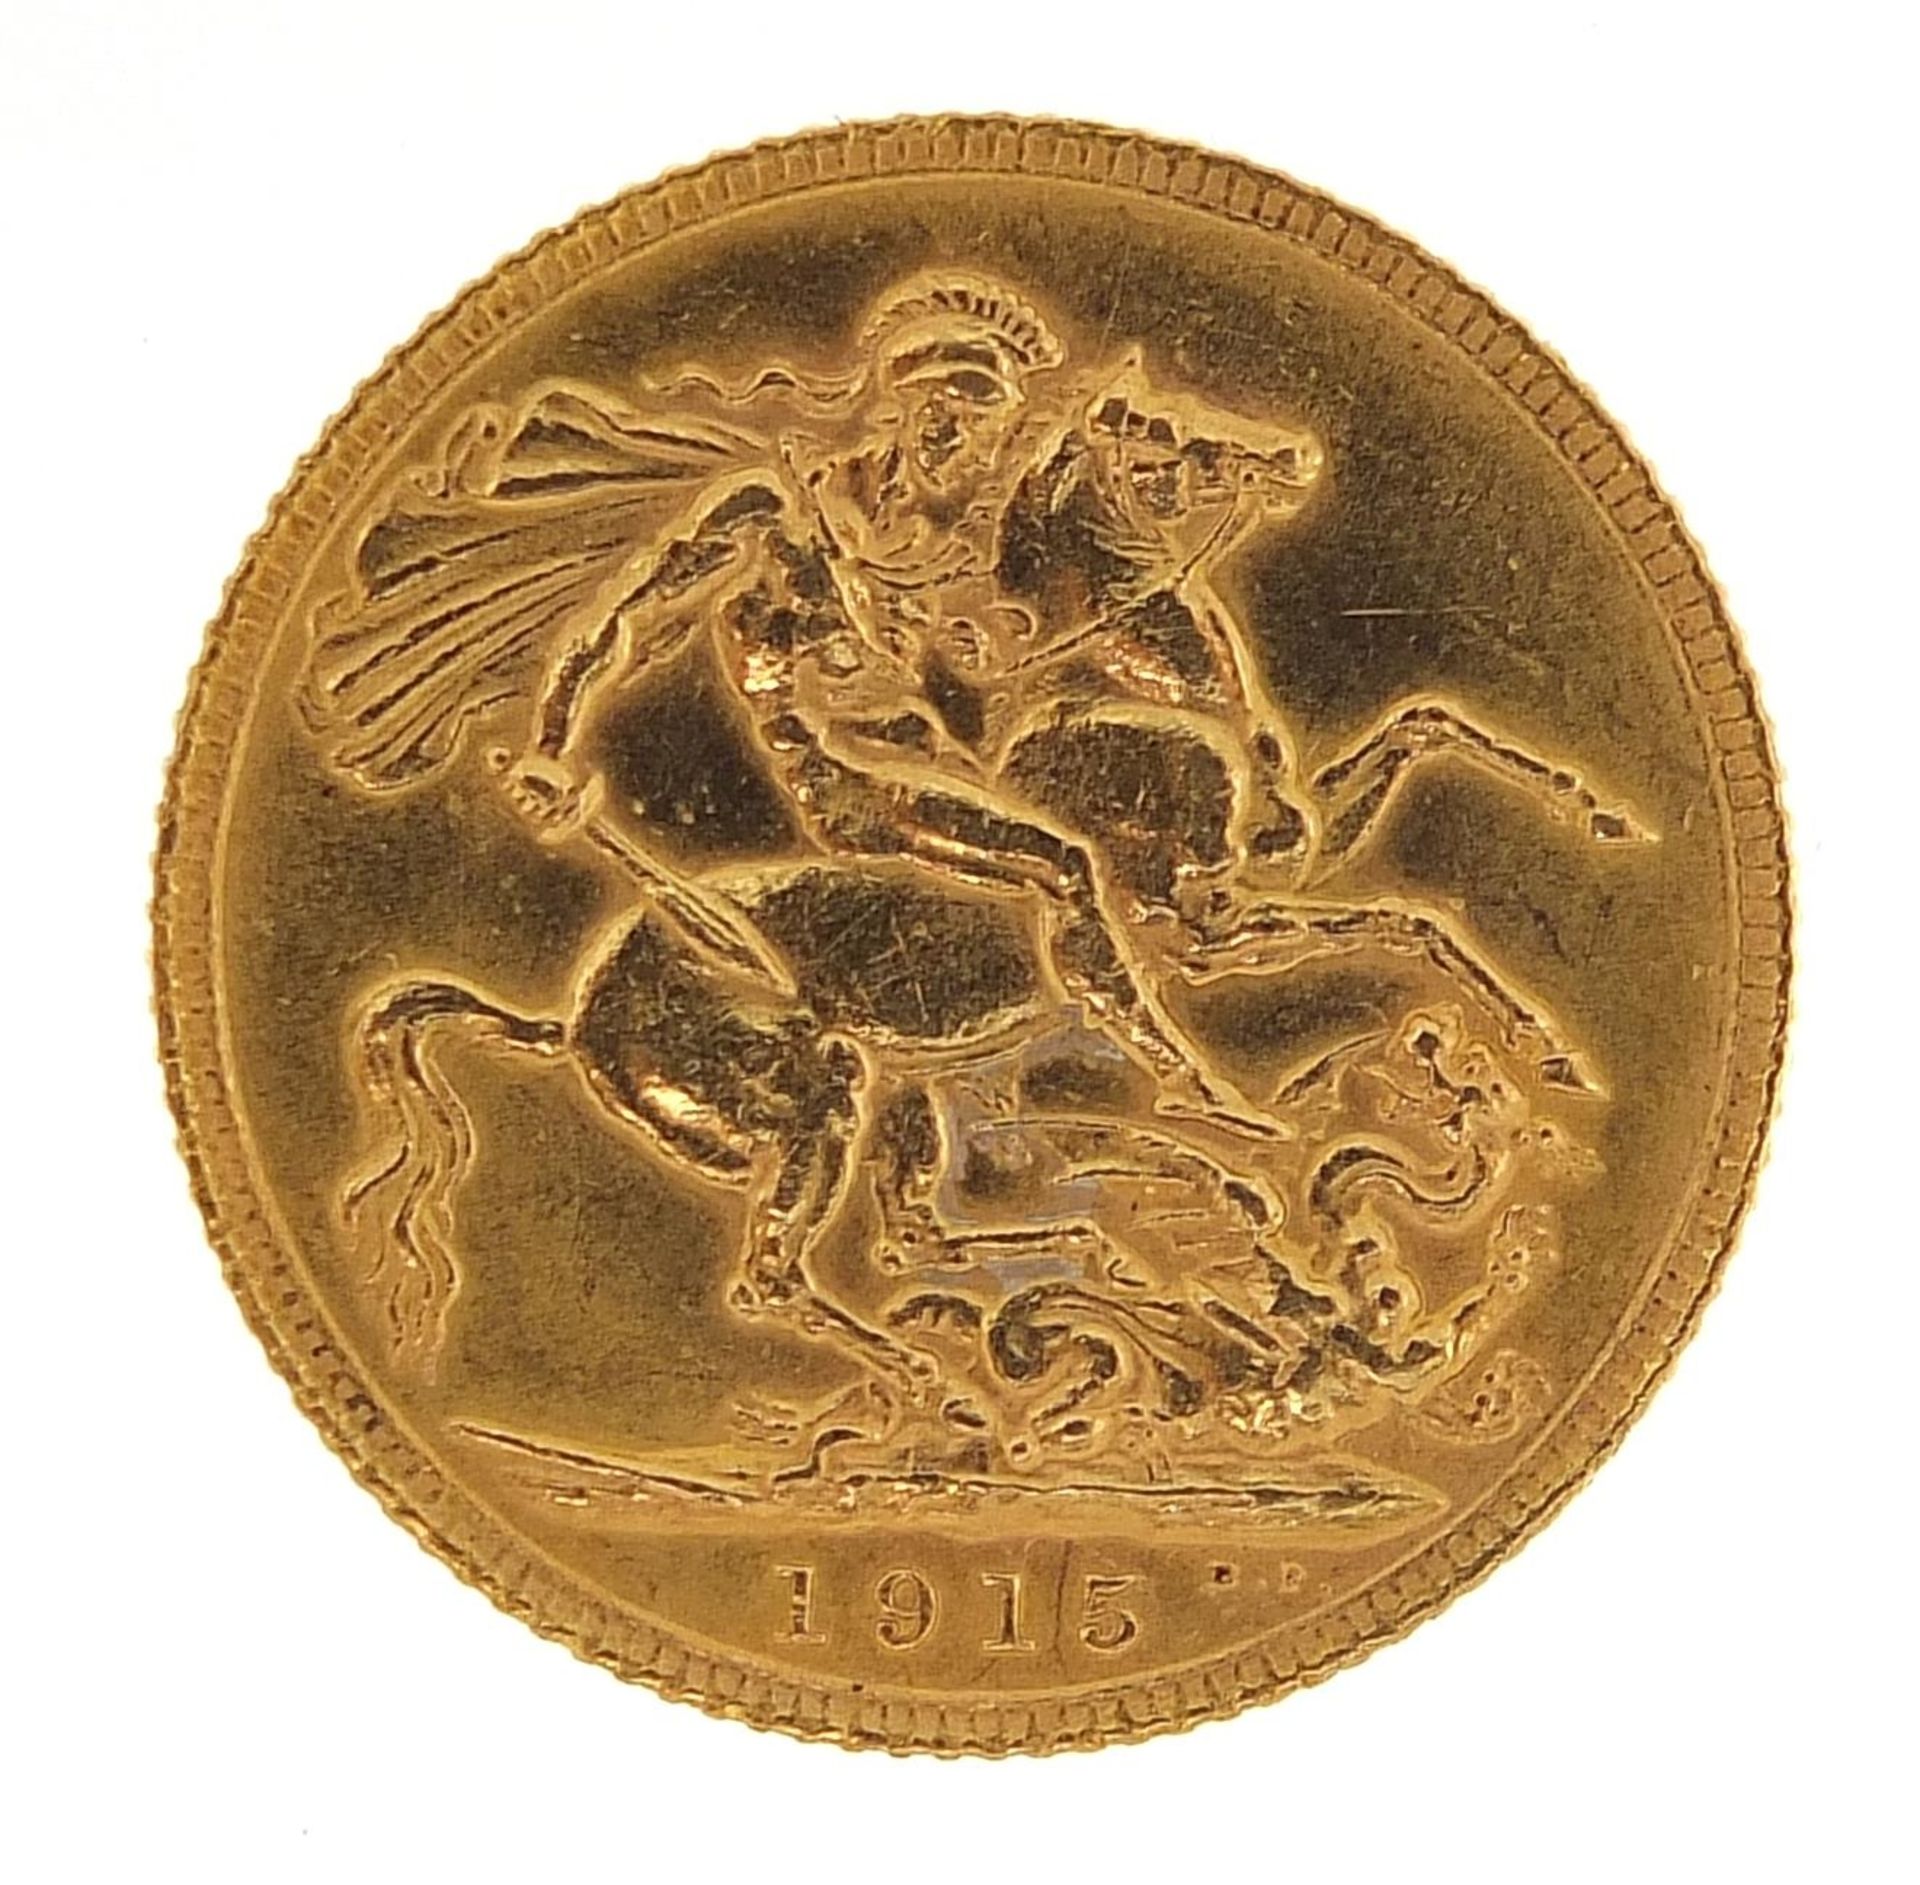 George V 1915 gold sovereign - this lot is sold without buyer's premium